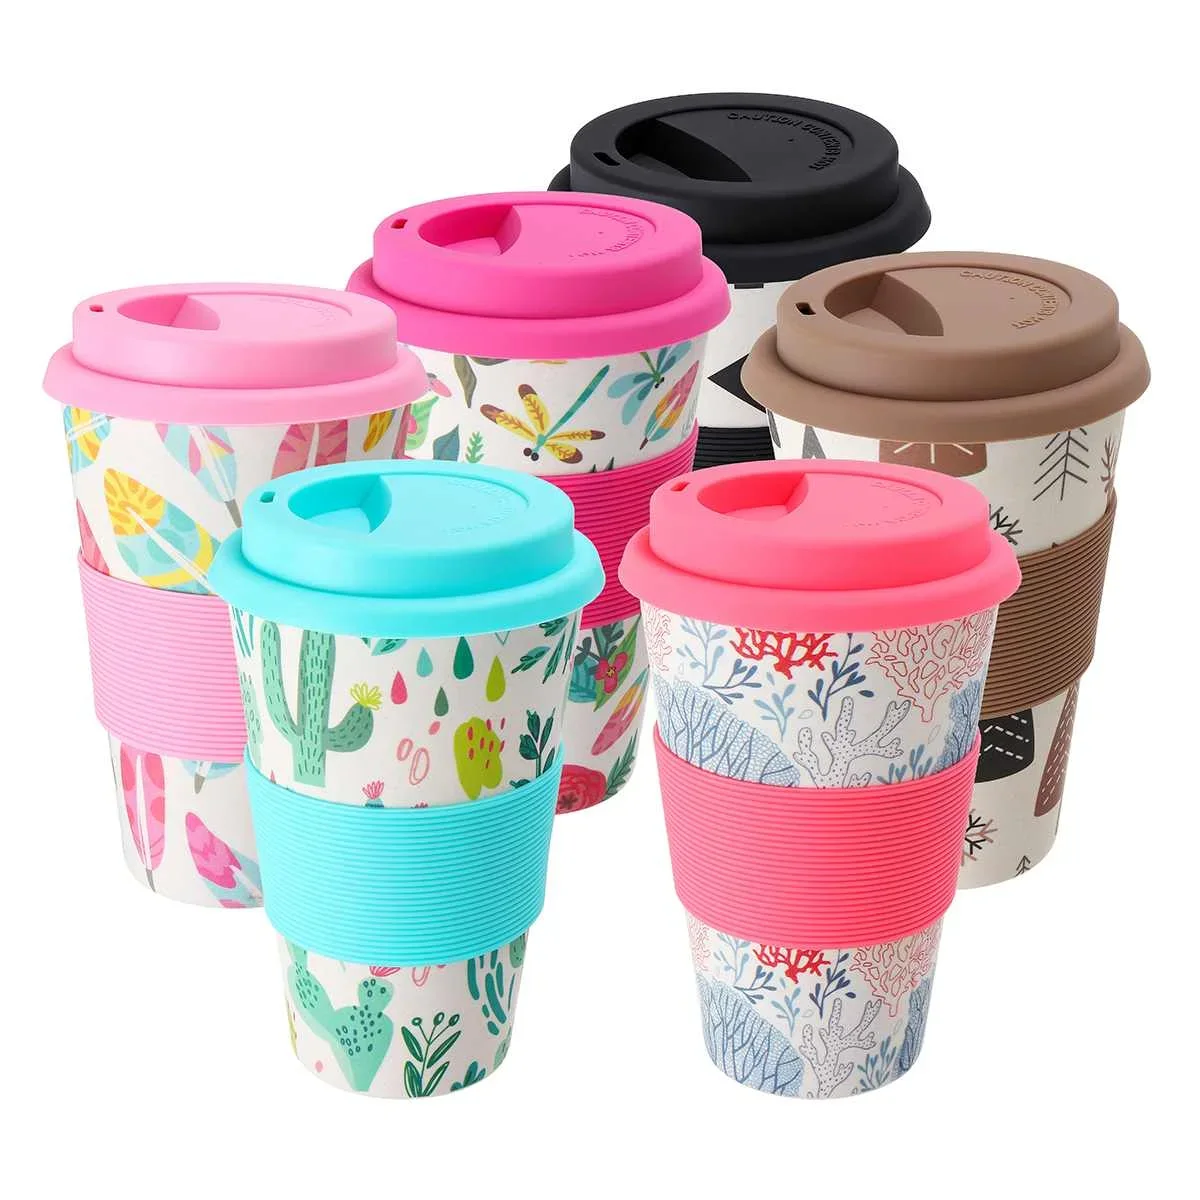 Newest Hot 470ml Reusable Bamboo Fibre Coffee Cups Eco Friendly Travel  Coffee Mugs Drinking Mug With Silicone Lids - AliExpress